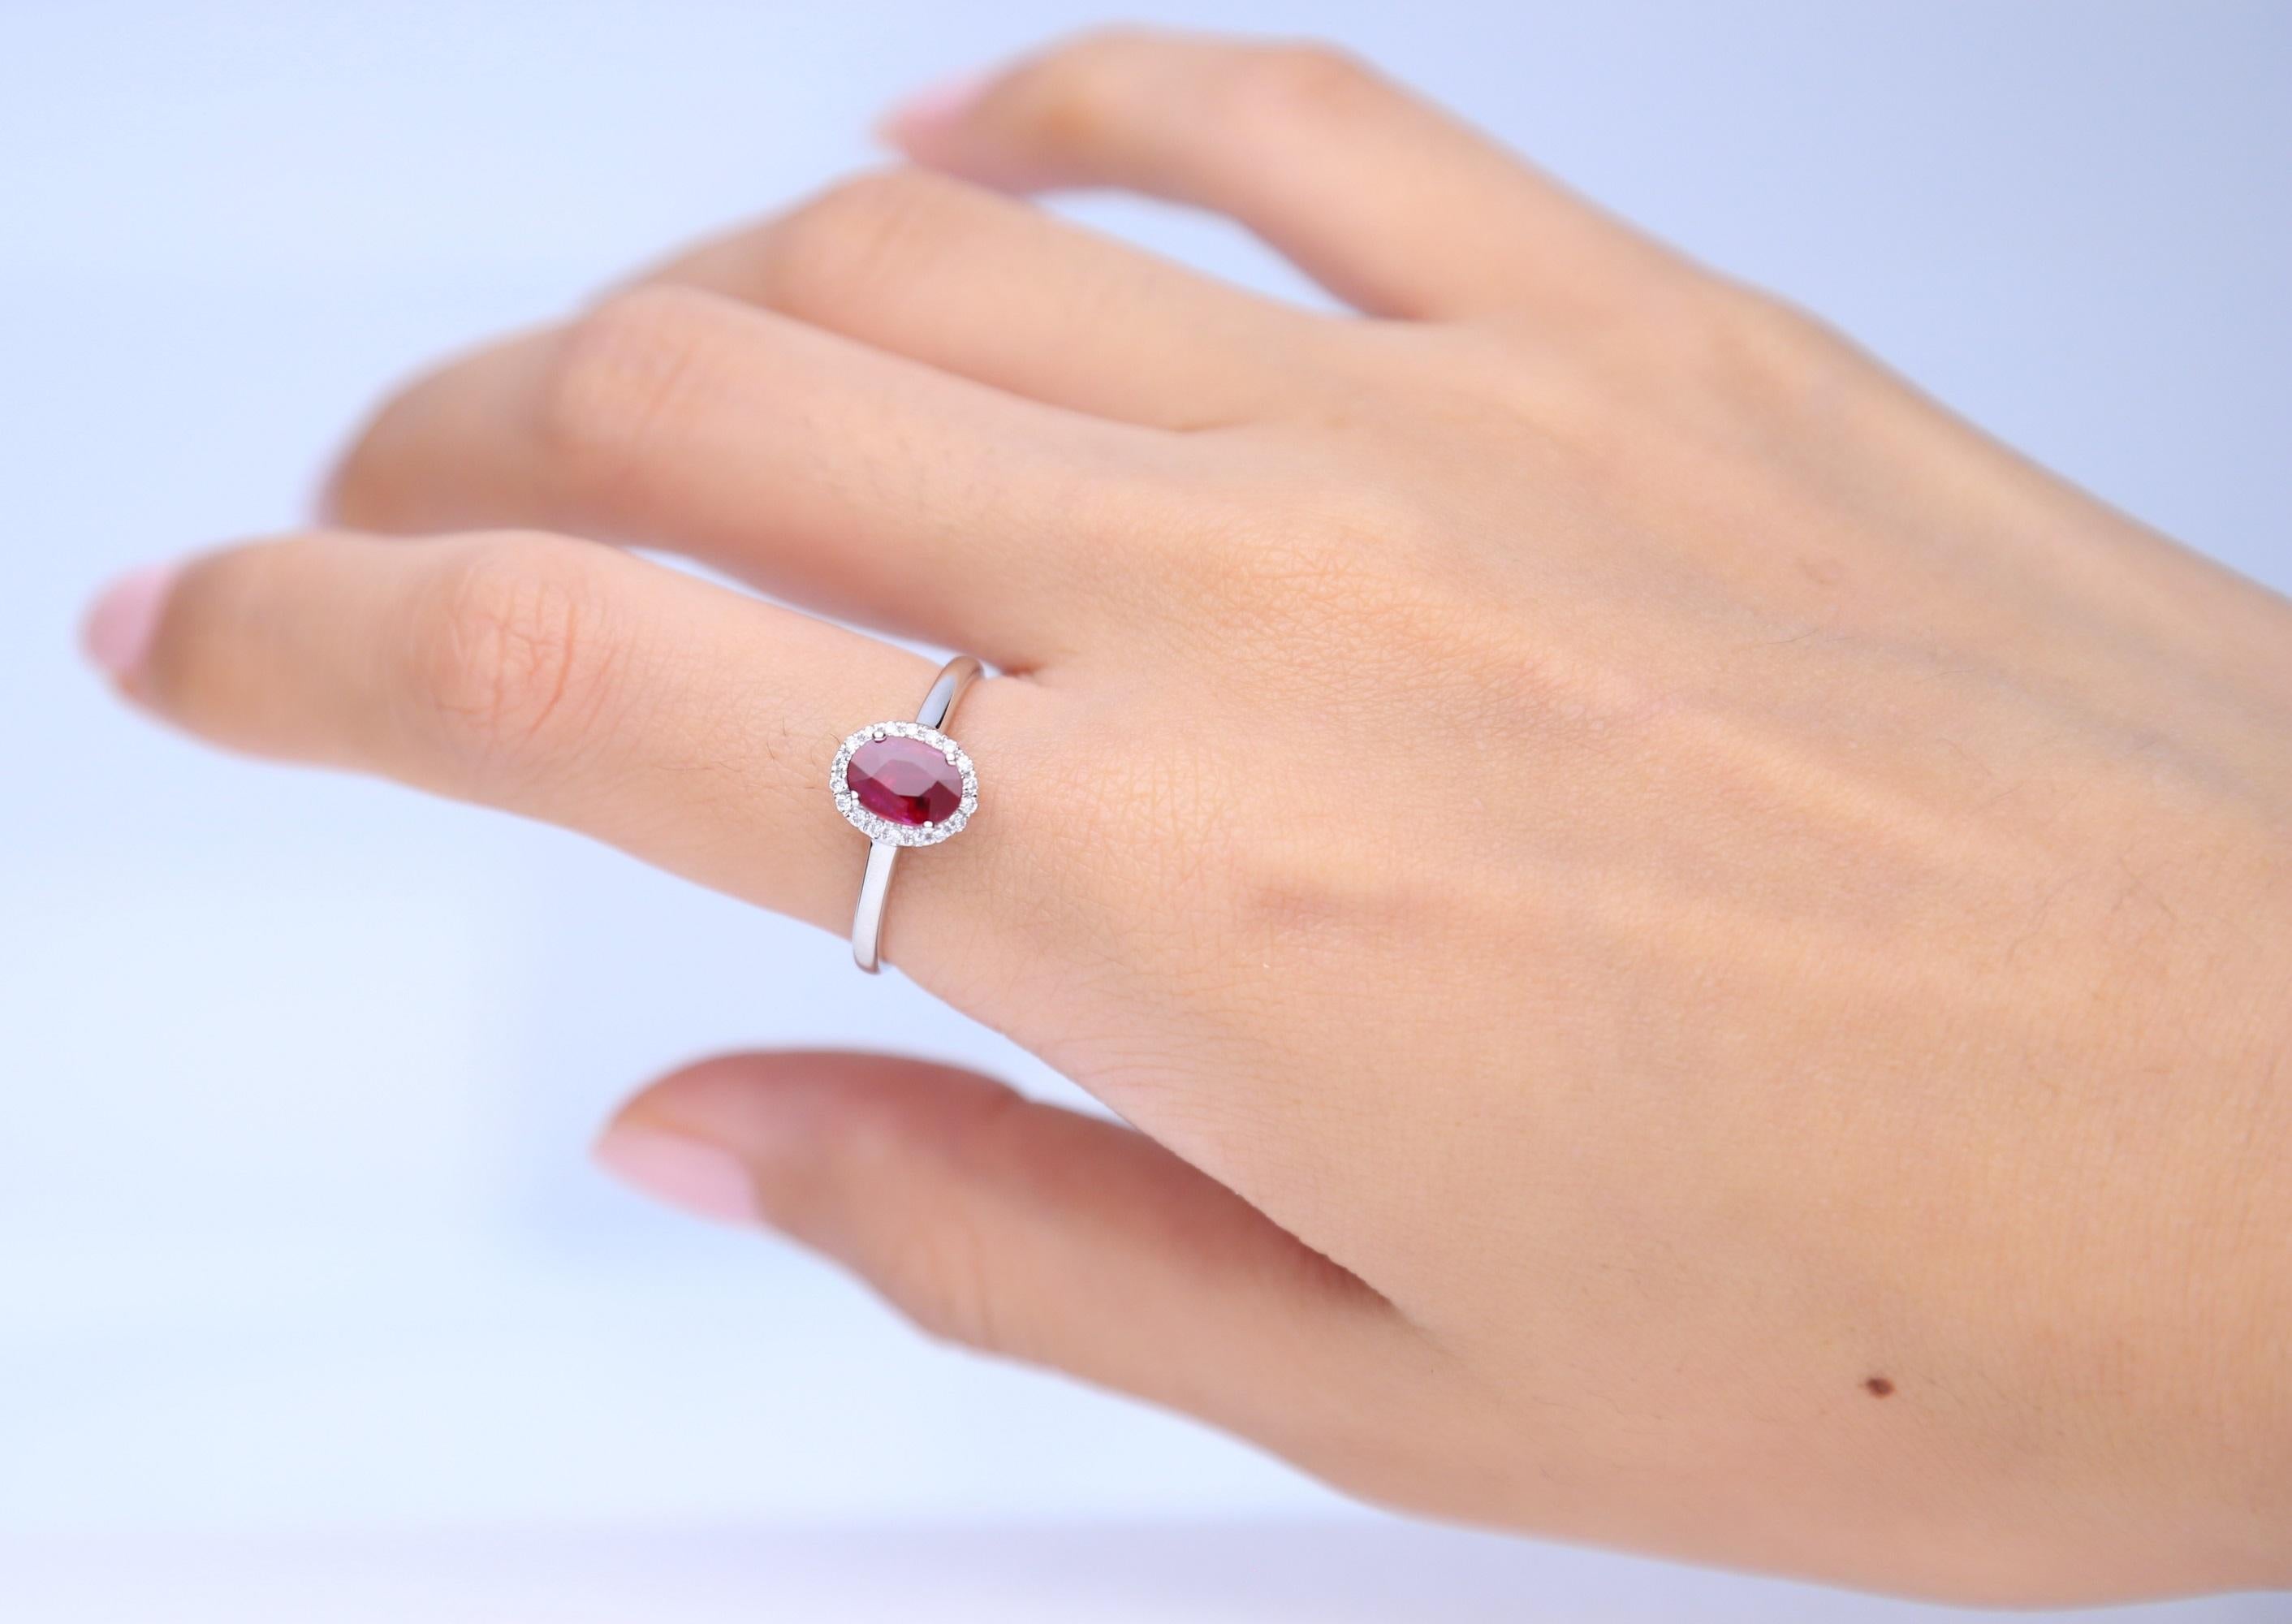 Decorate yourself in elegance with this Ring is crafted from 10-karat White Gold by Gin & Grace. This Ring is made up of Oval-Cut Ruby (1 pcs) 0.84 carat and Round-cut White Diamond (18 Pcs) 0.10 Carat. This Ring is weight 1.88 grams. This delicate